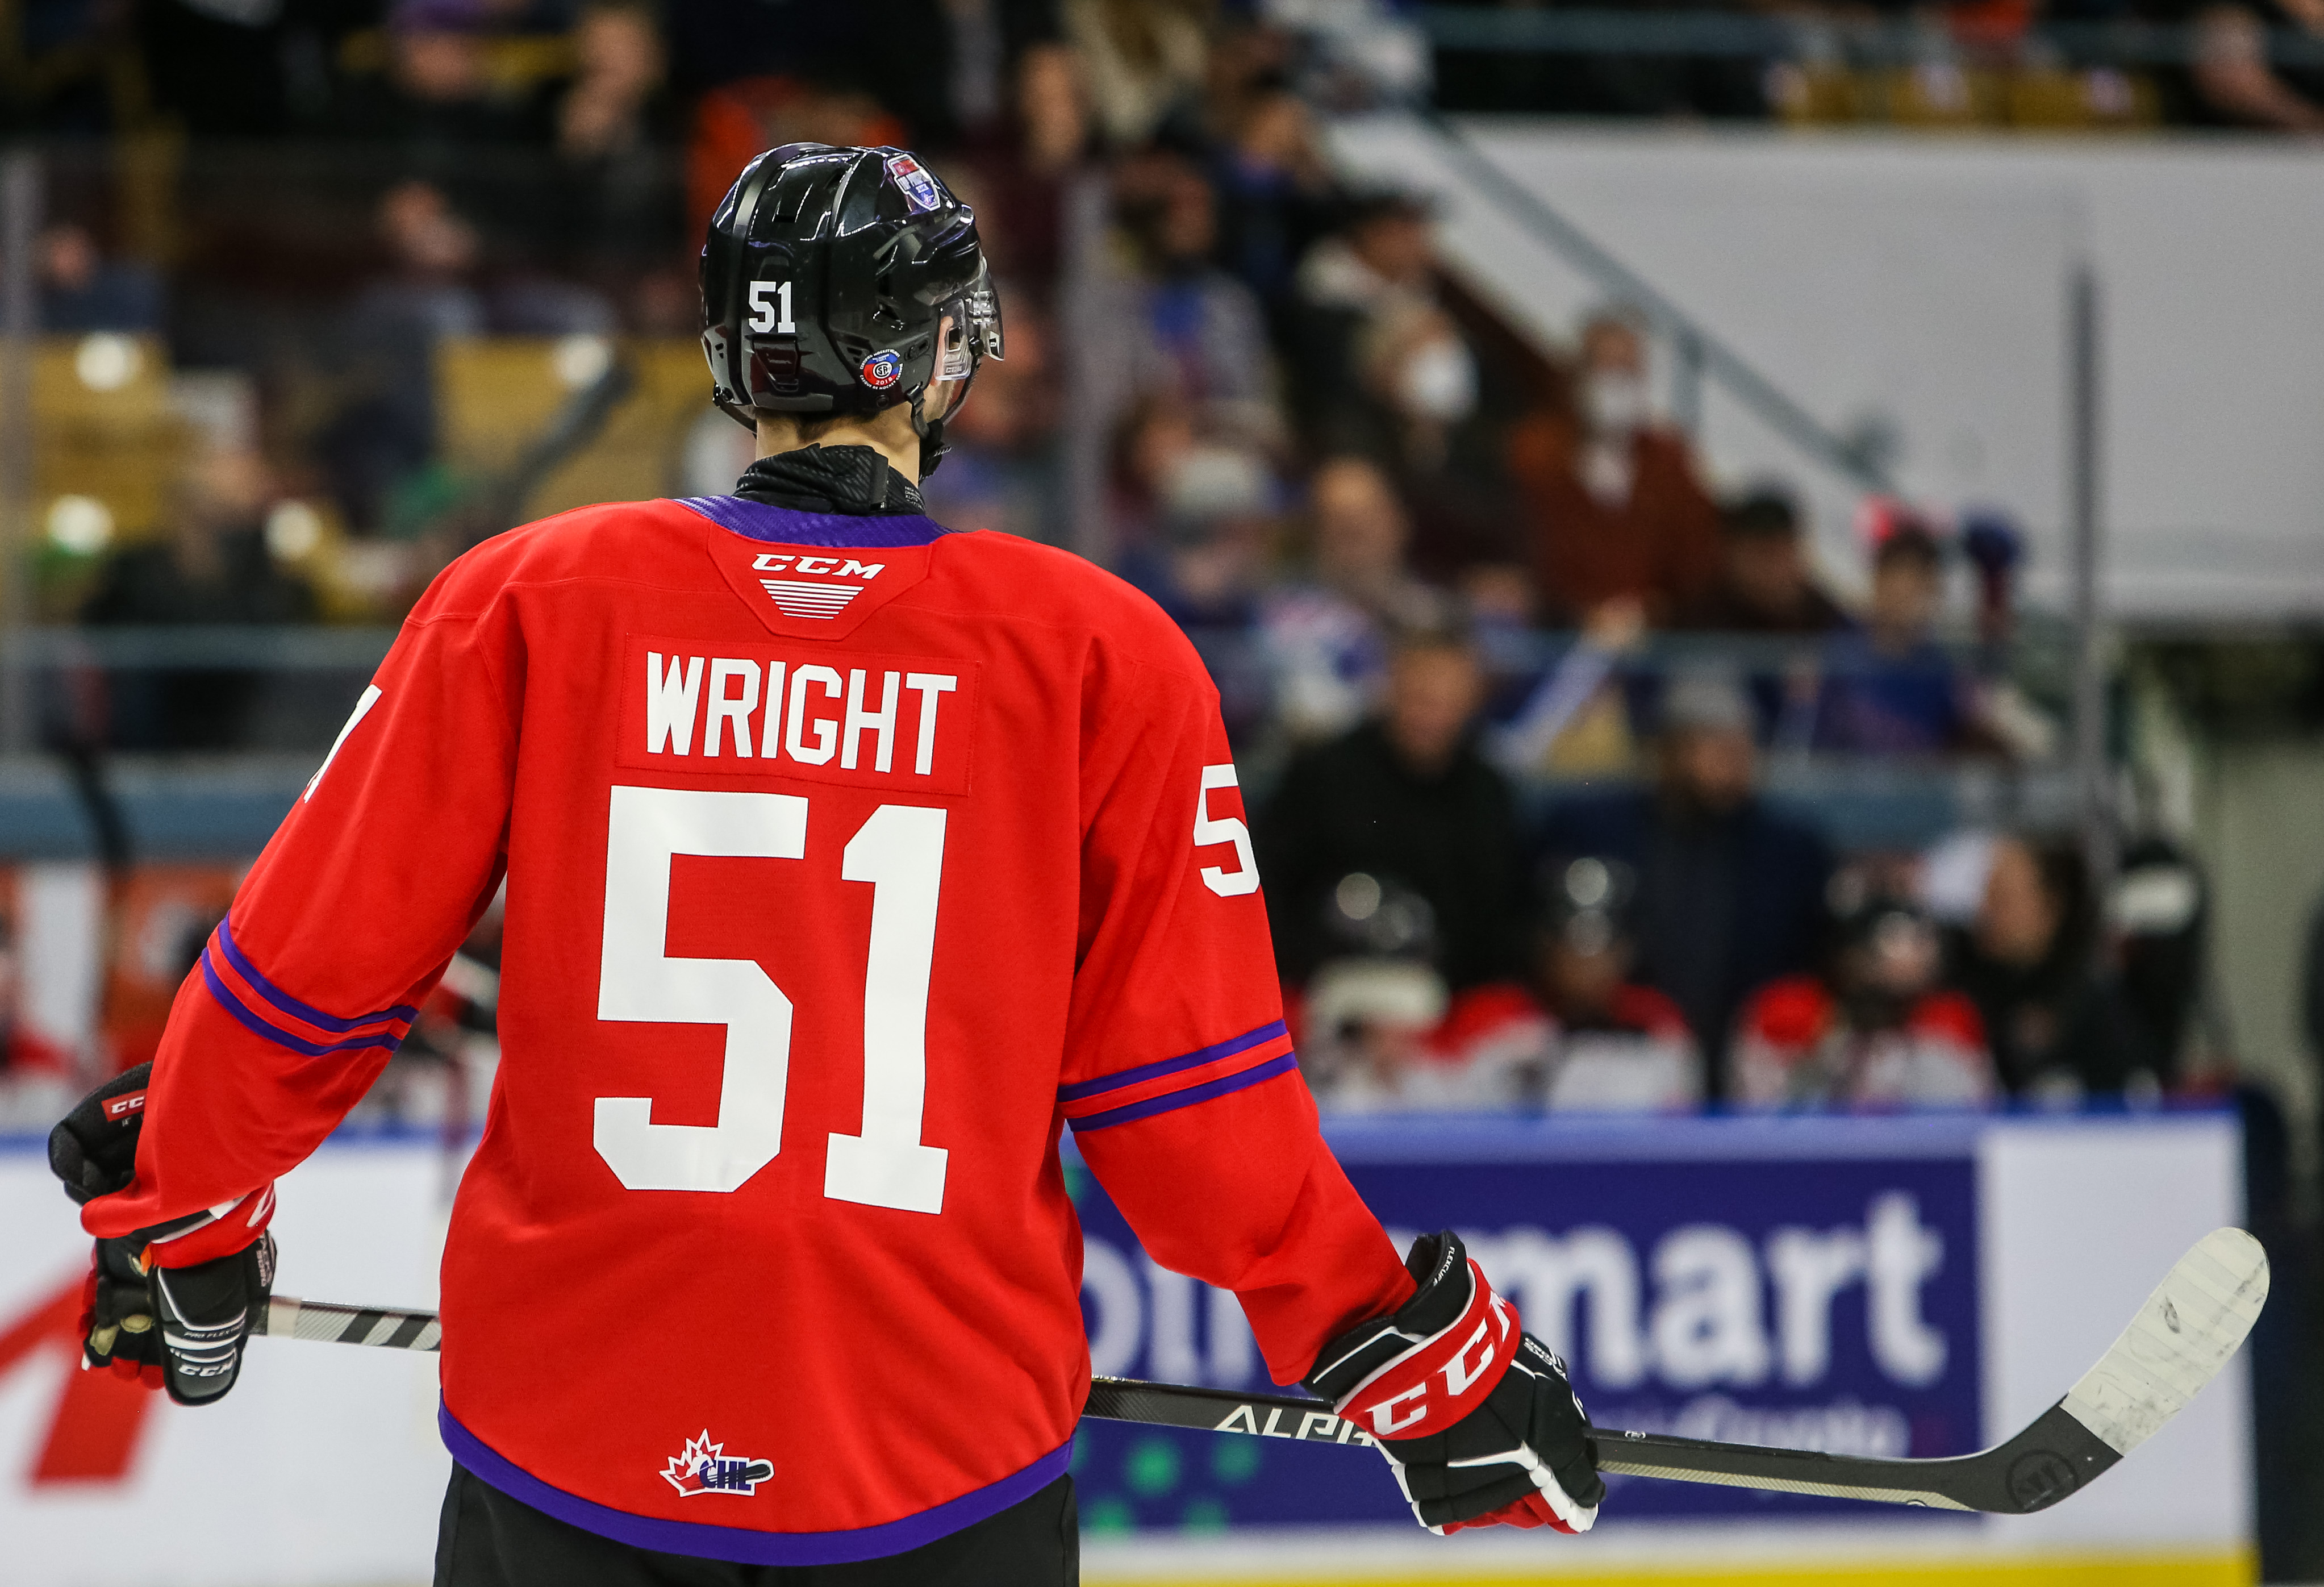 Shane Wright #51 of Team Red skates against Team White in the 2022 CHL/NHL Top Prospects Game at Kitchener Memorial Auditorium on March 23, 2022 in Kitchener, Ontario.